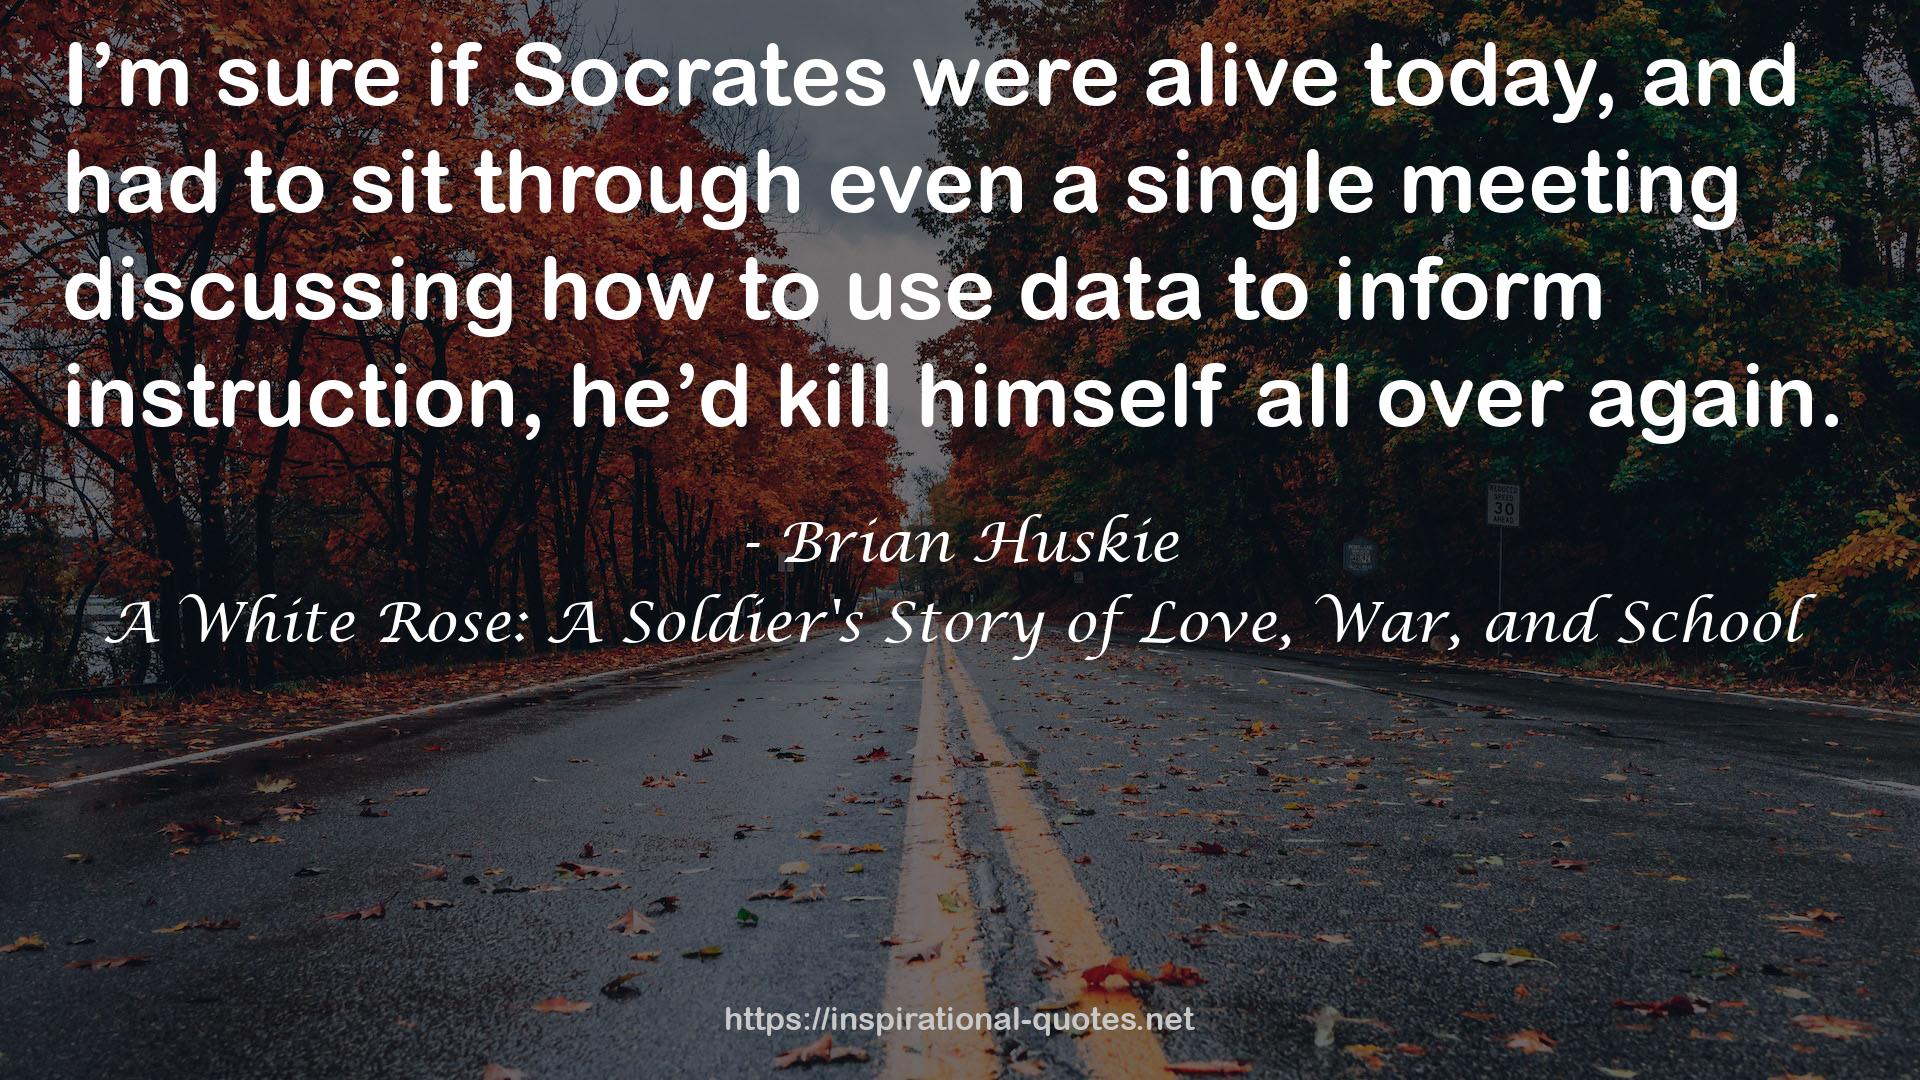 A White Rose: A Soldier's Story of Love, War, and School QUOTES